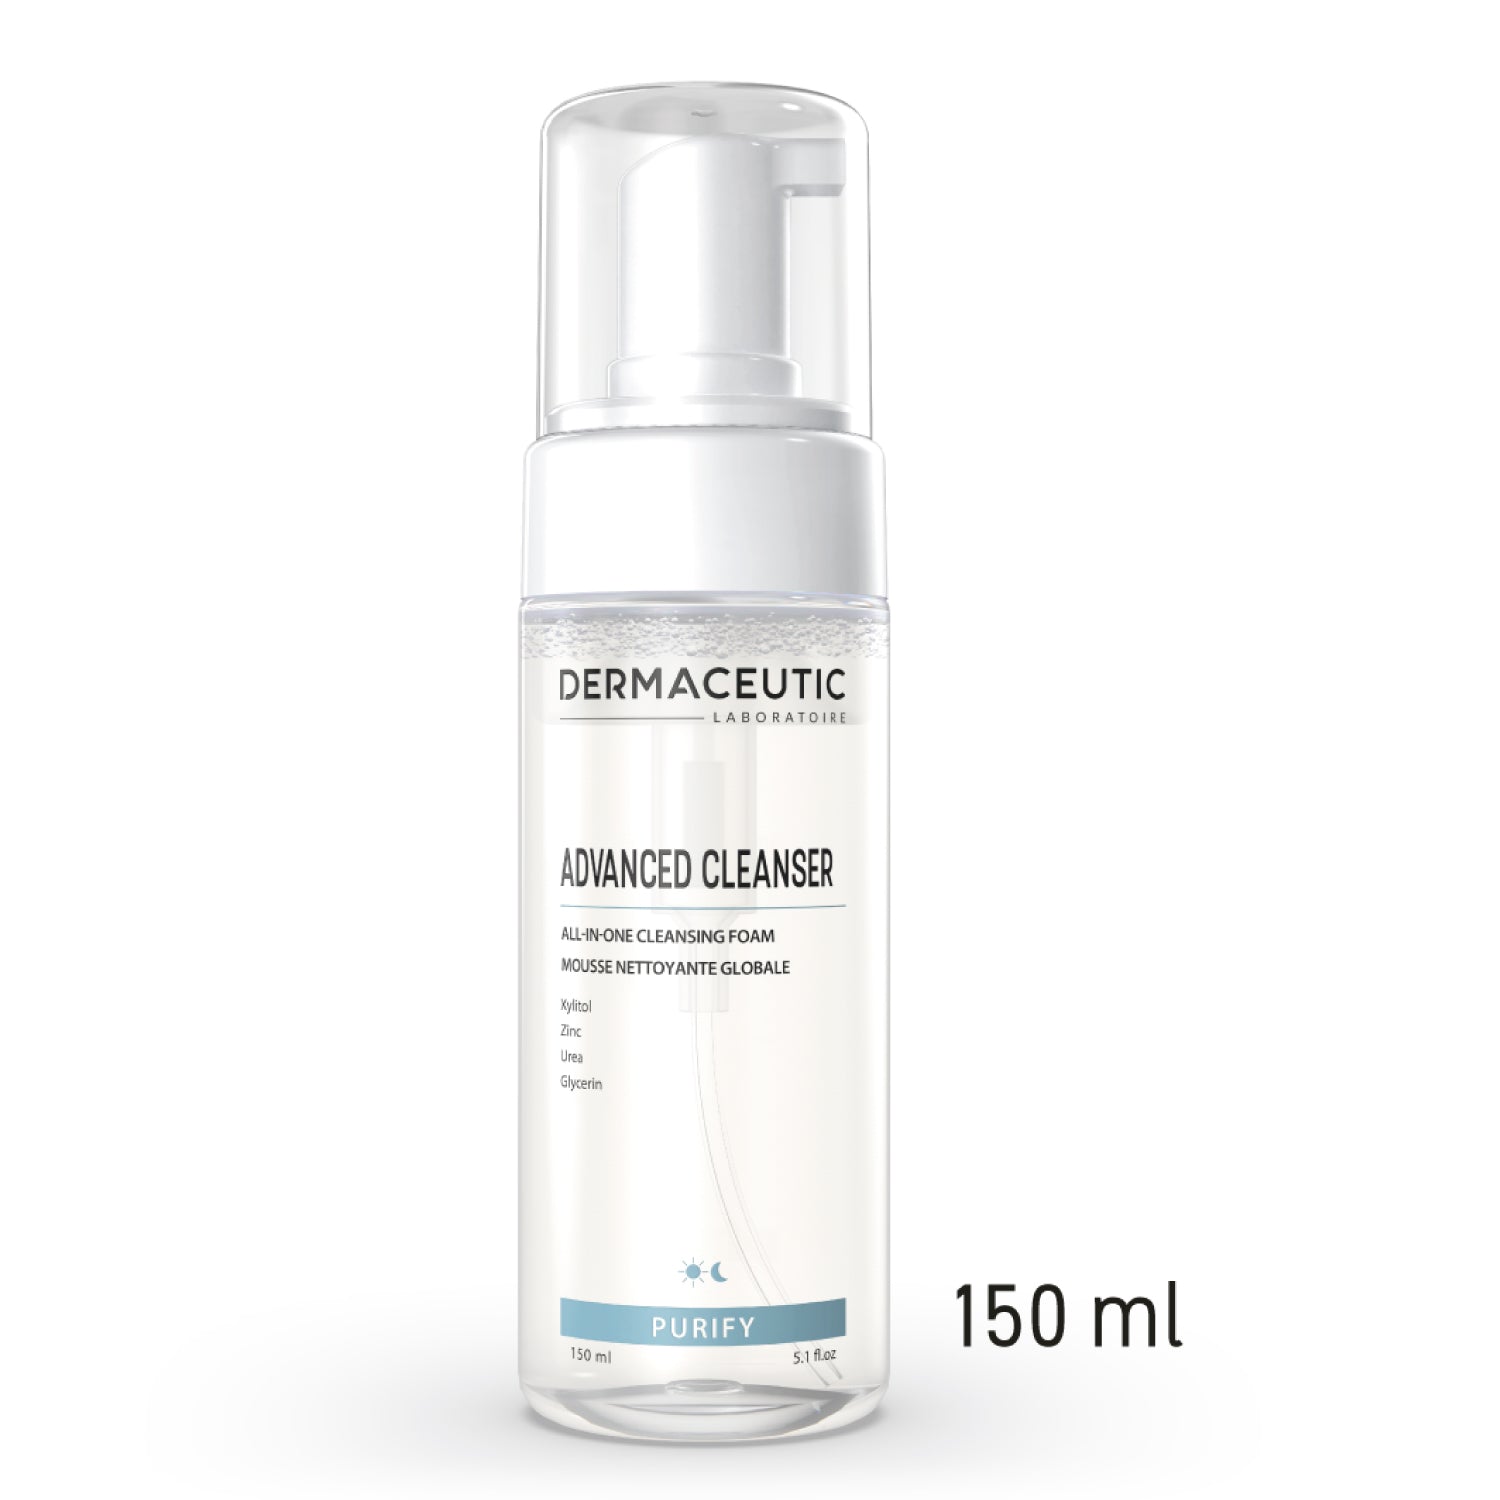 Dermaceutic Advanced Cleanser - All in one cleansing foam